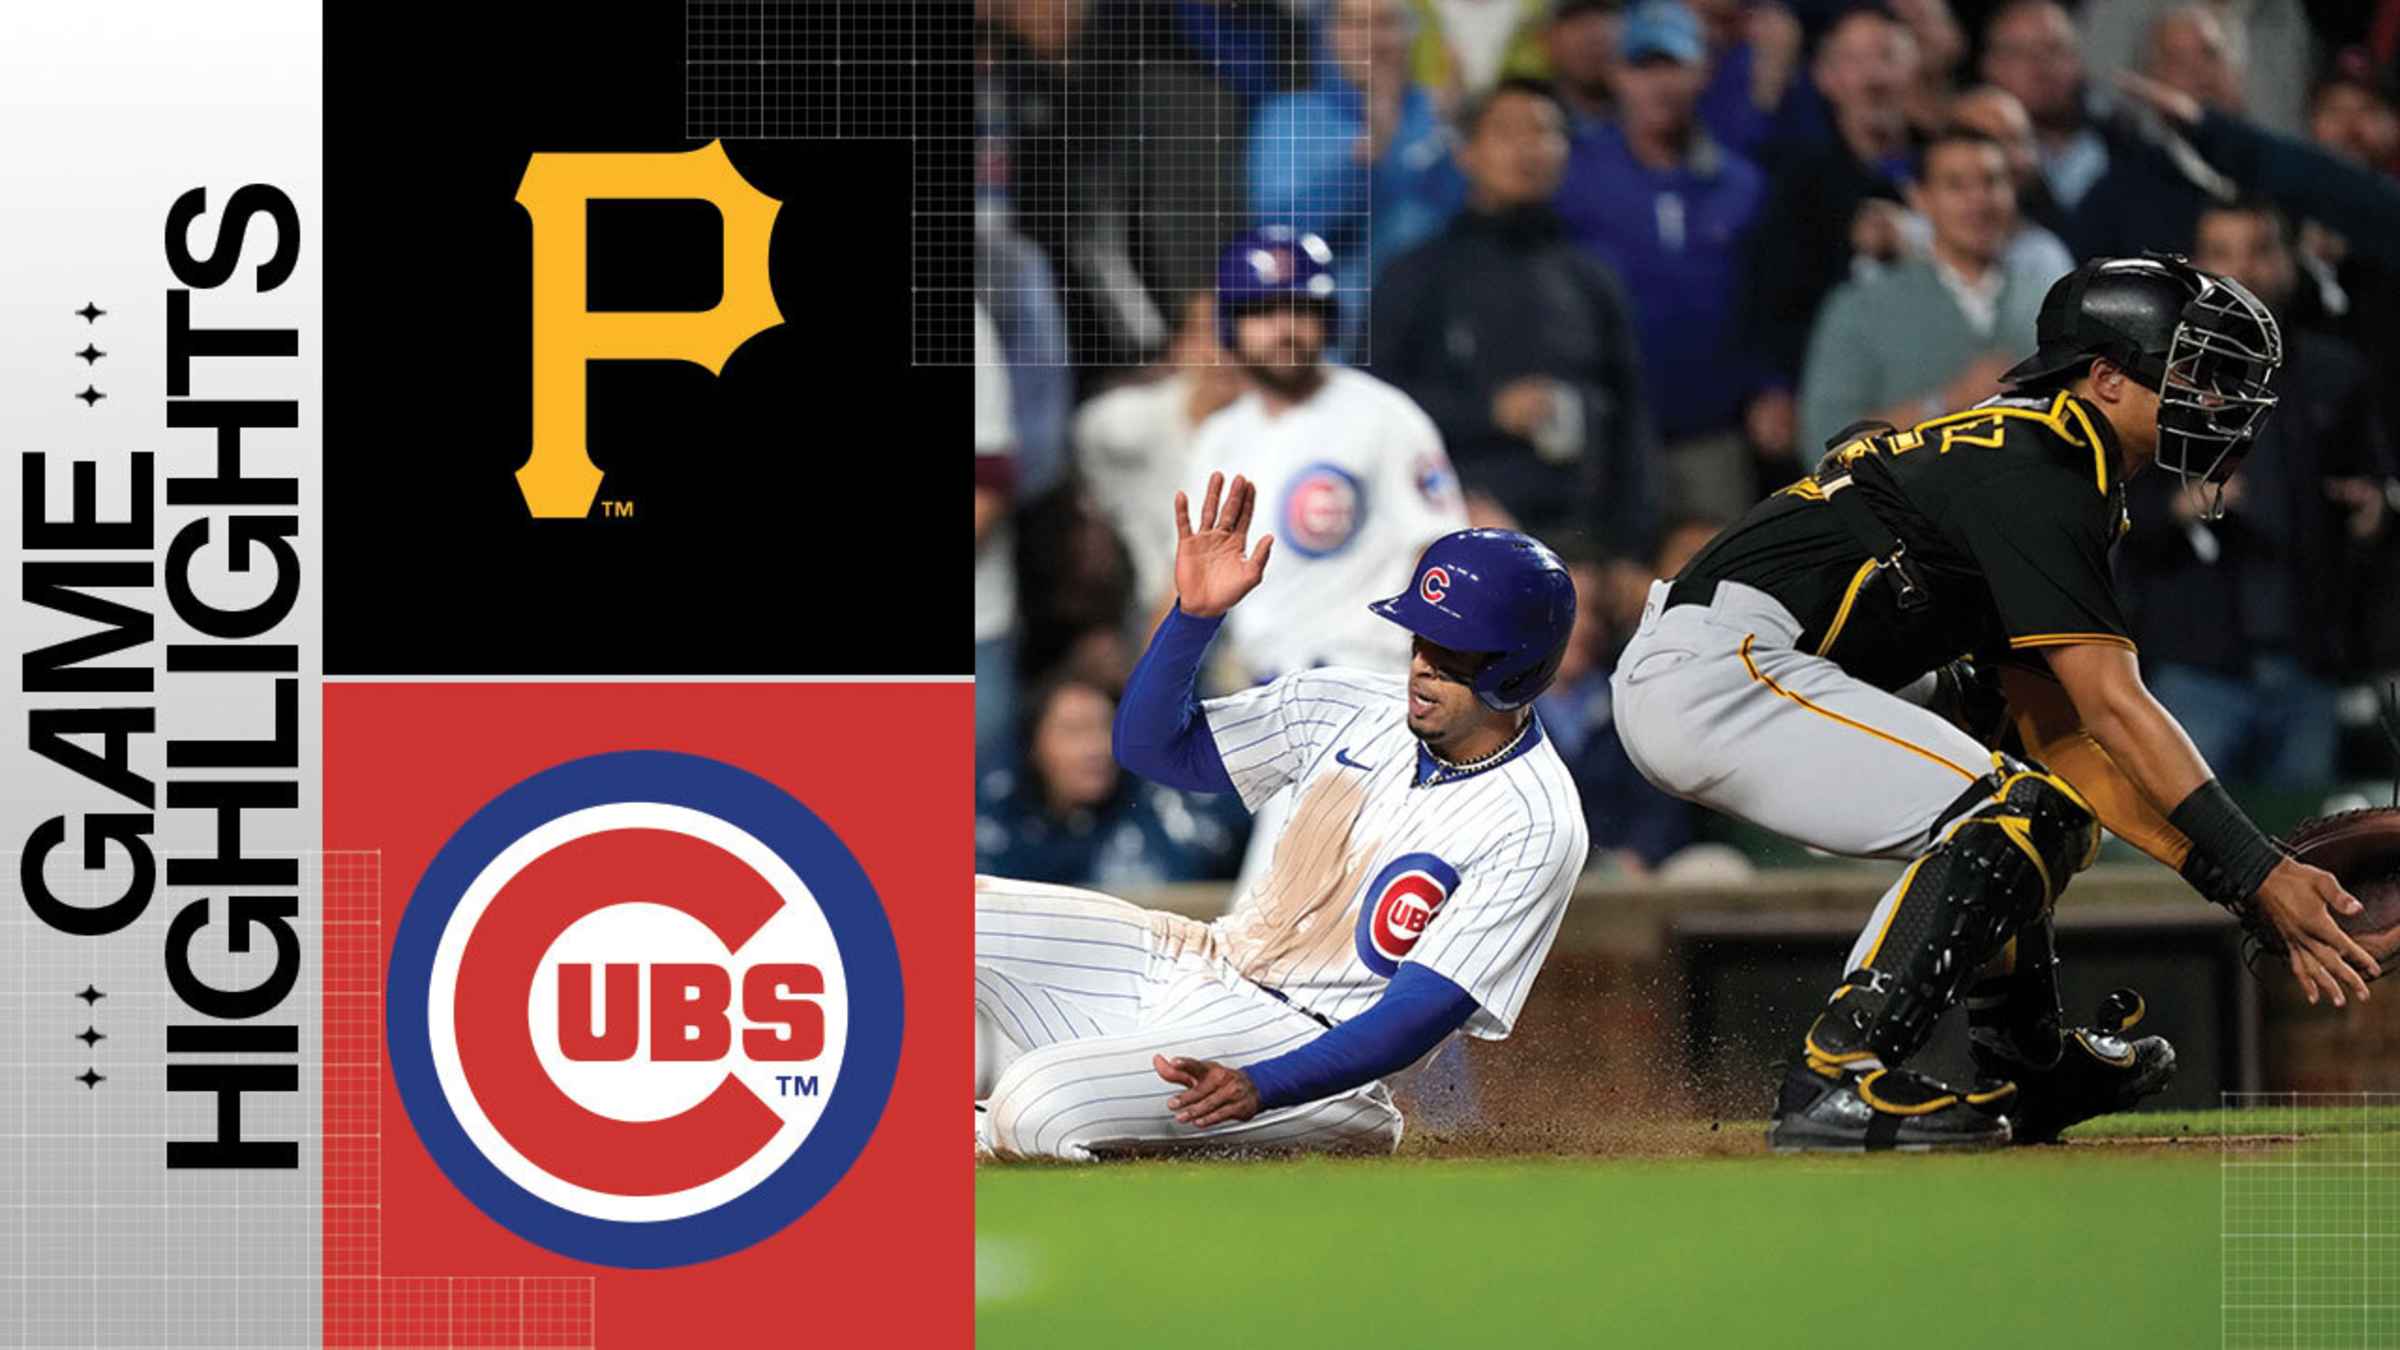 Cubs collect 14 hits in win over Pirates